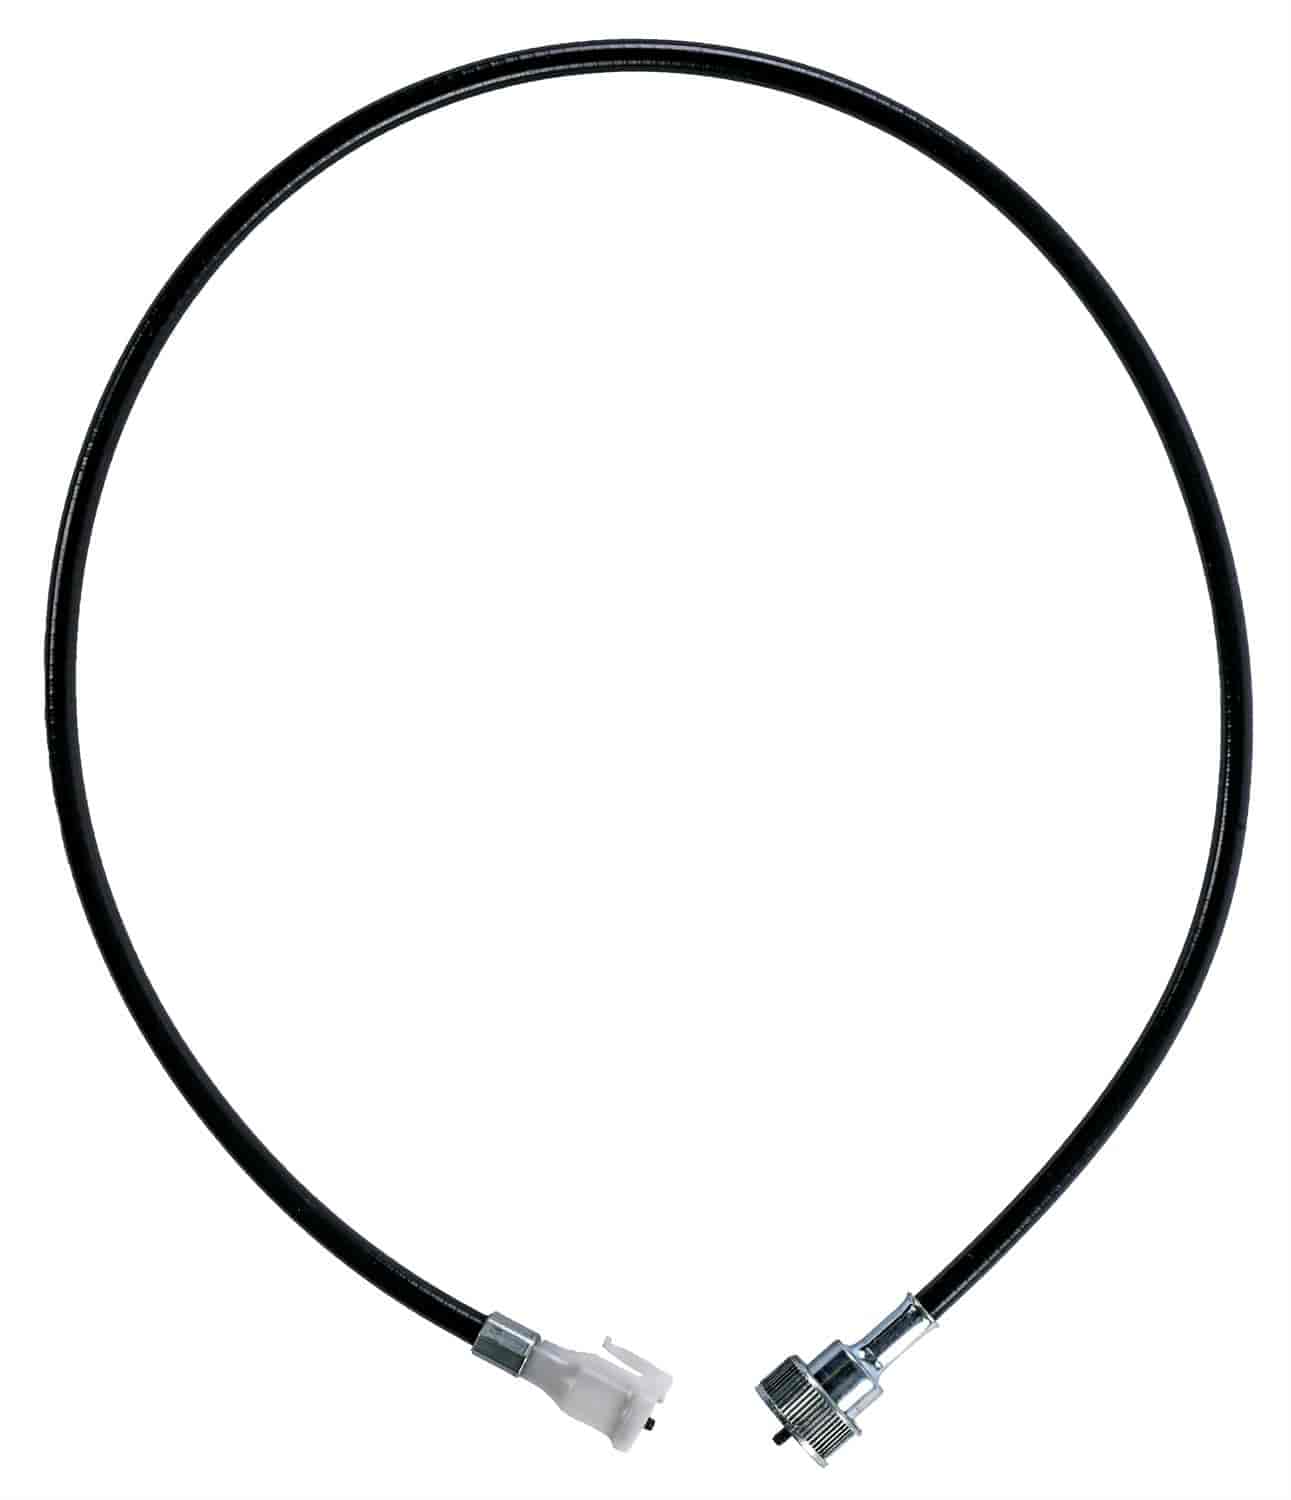 Mopar Style Speedometer Cable Assembly [Clip-on]